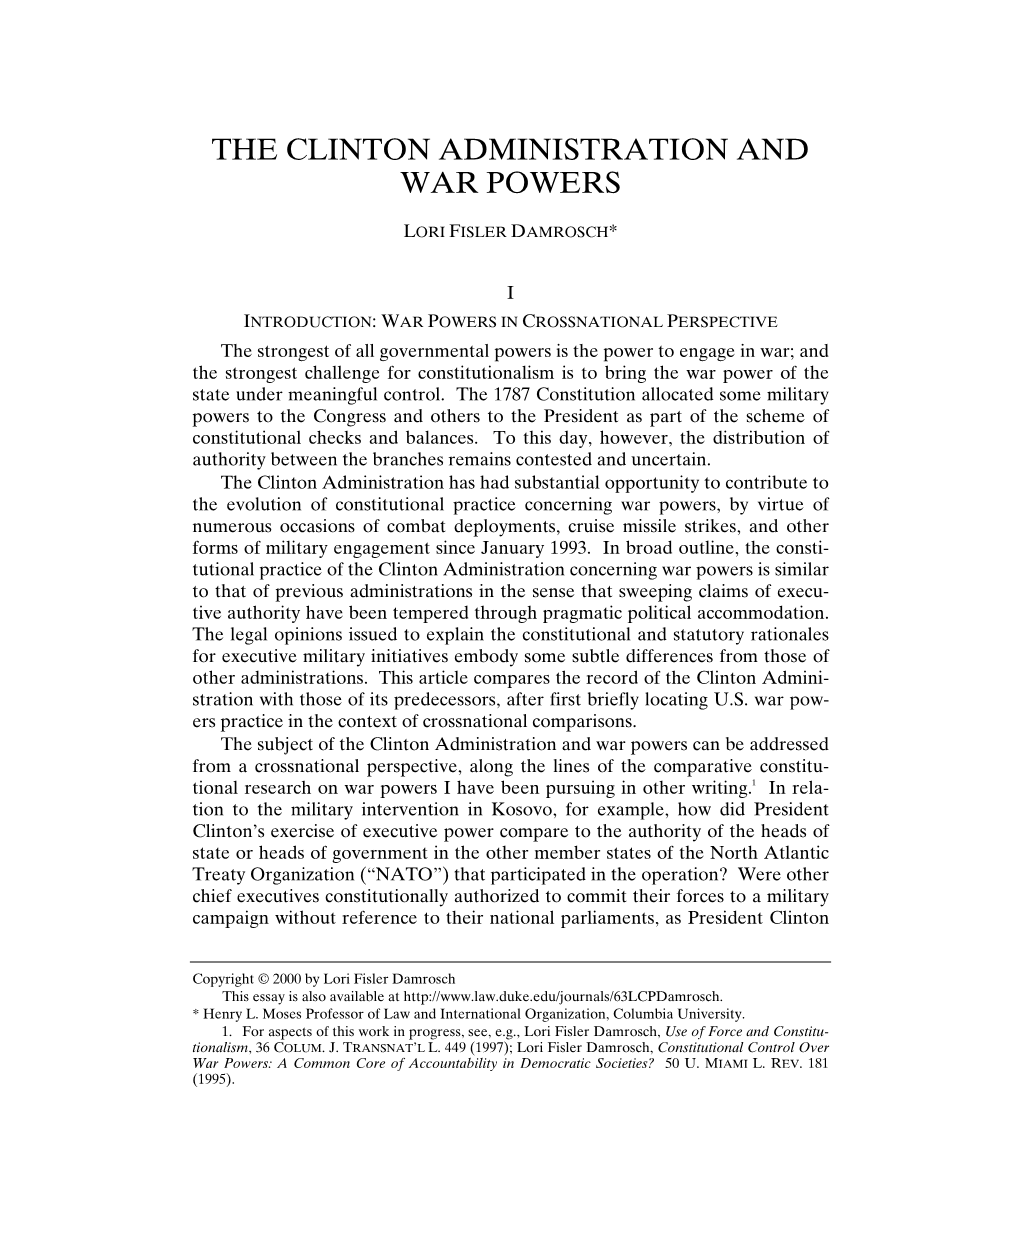 The Clinton Administration and War Powers